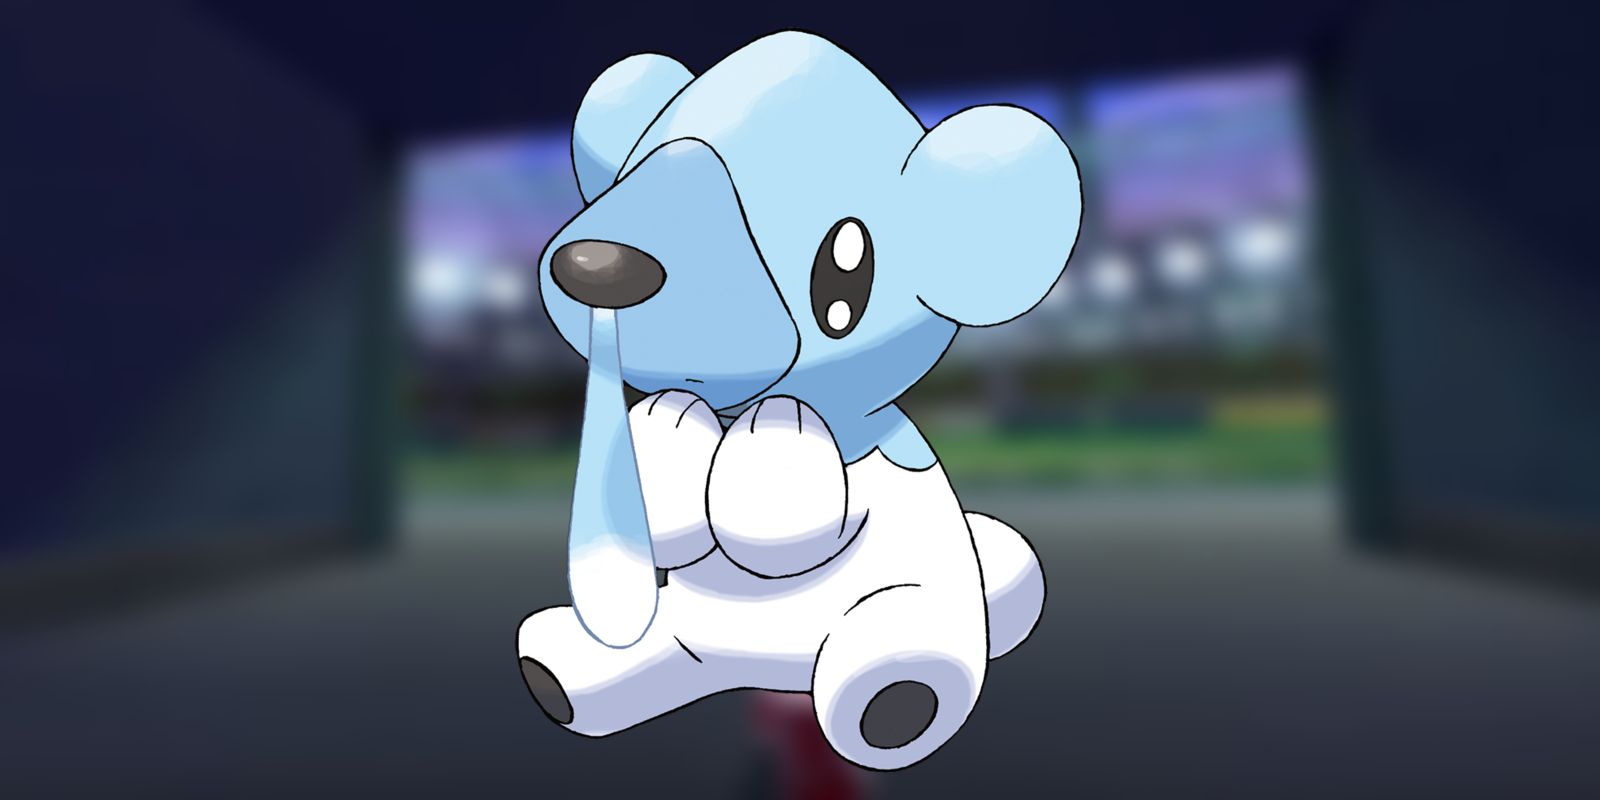 A Cubchoo against a blurry background